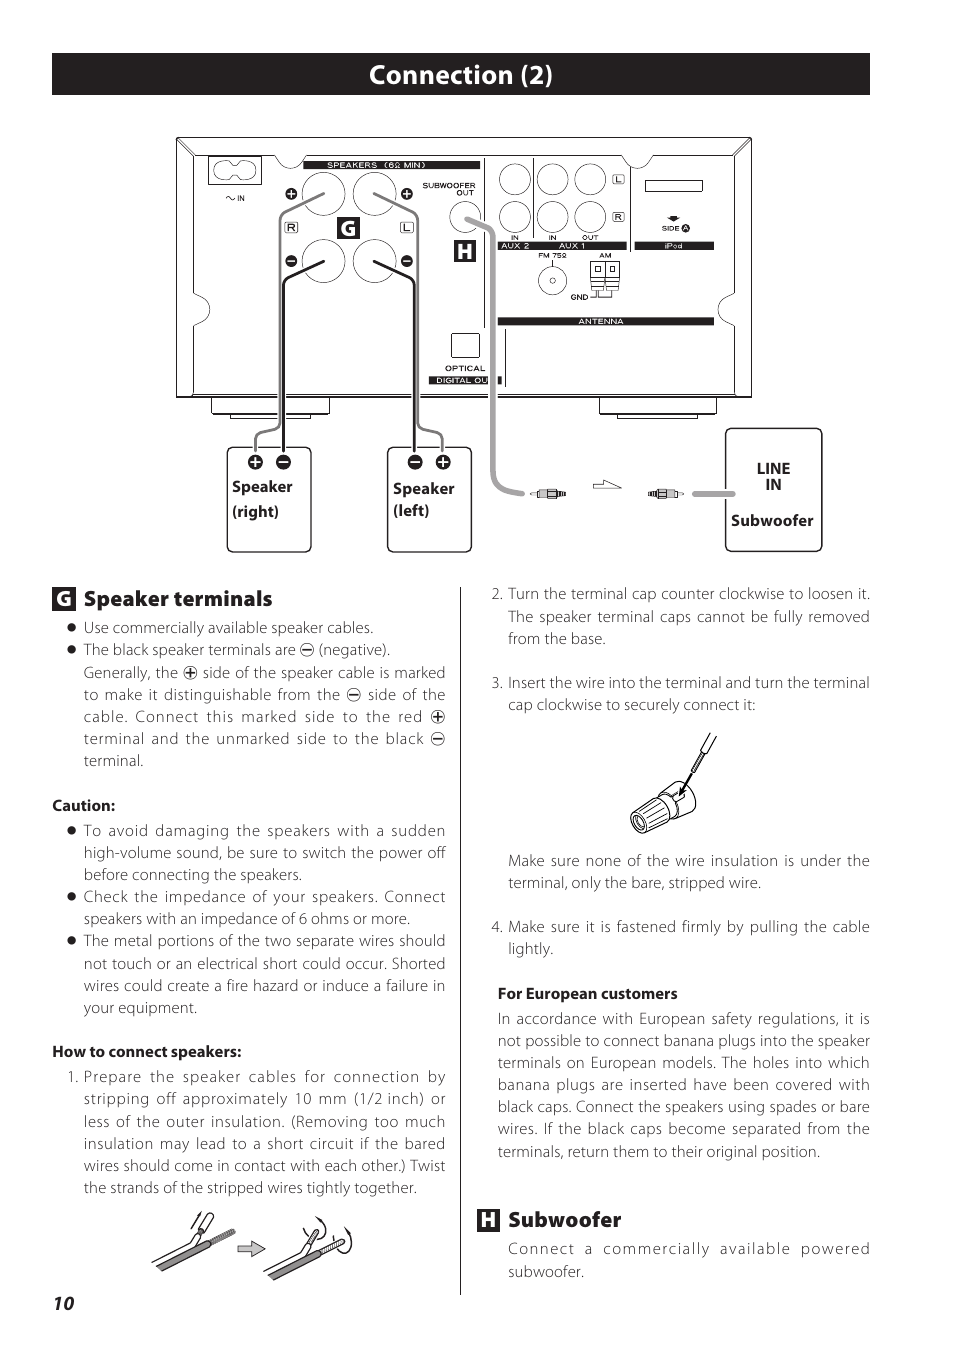 Connecting antennas (am/fm), Connection (2), Gspeaker terminals | Subwoofer | Teac CD Receiver CR-H238i User Manual | Page 10 / 118